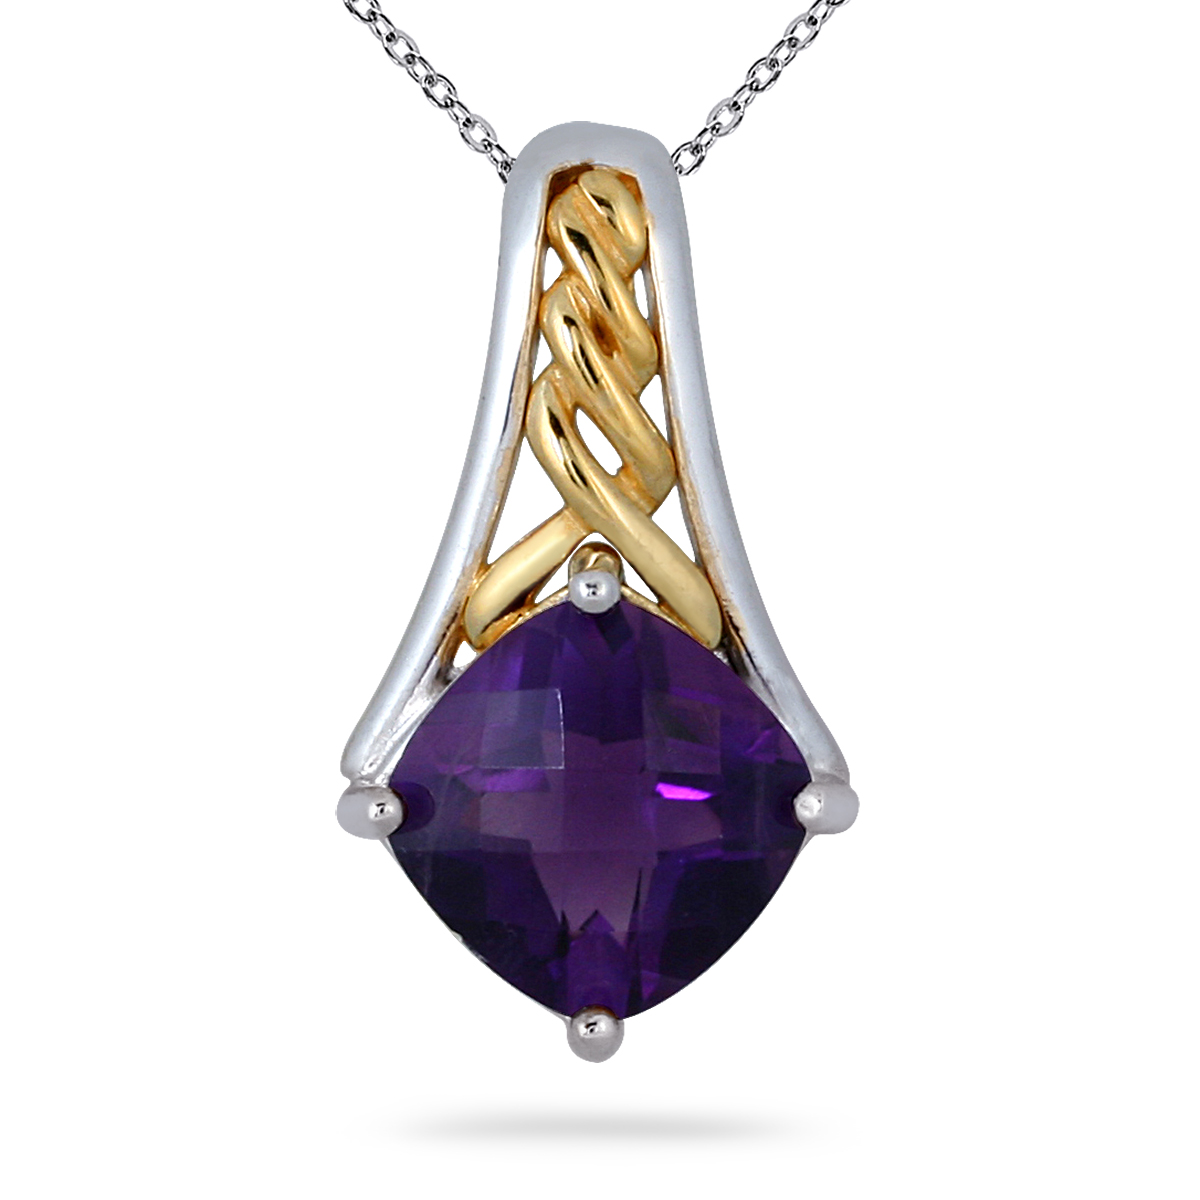 szul.com 2.75 Carat Amethyst 18K Gold Plated Two Tone Pendant in .925 Sterling Silver